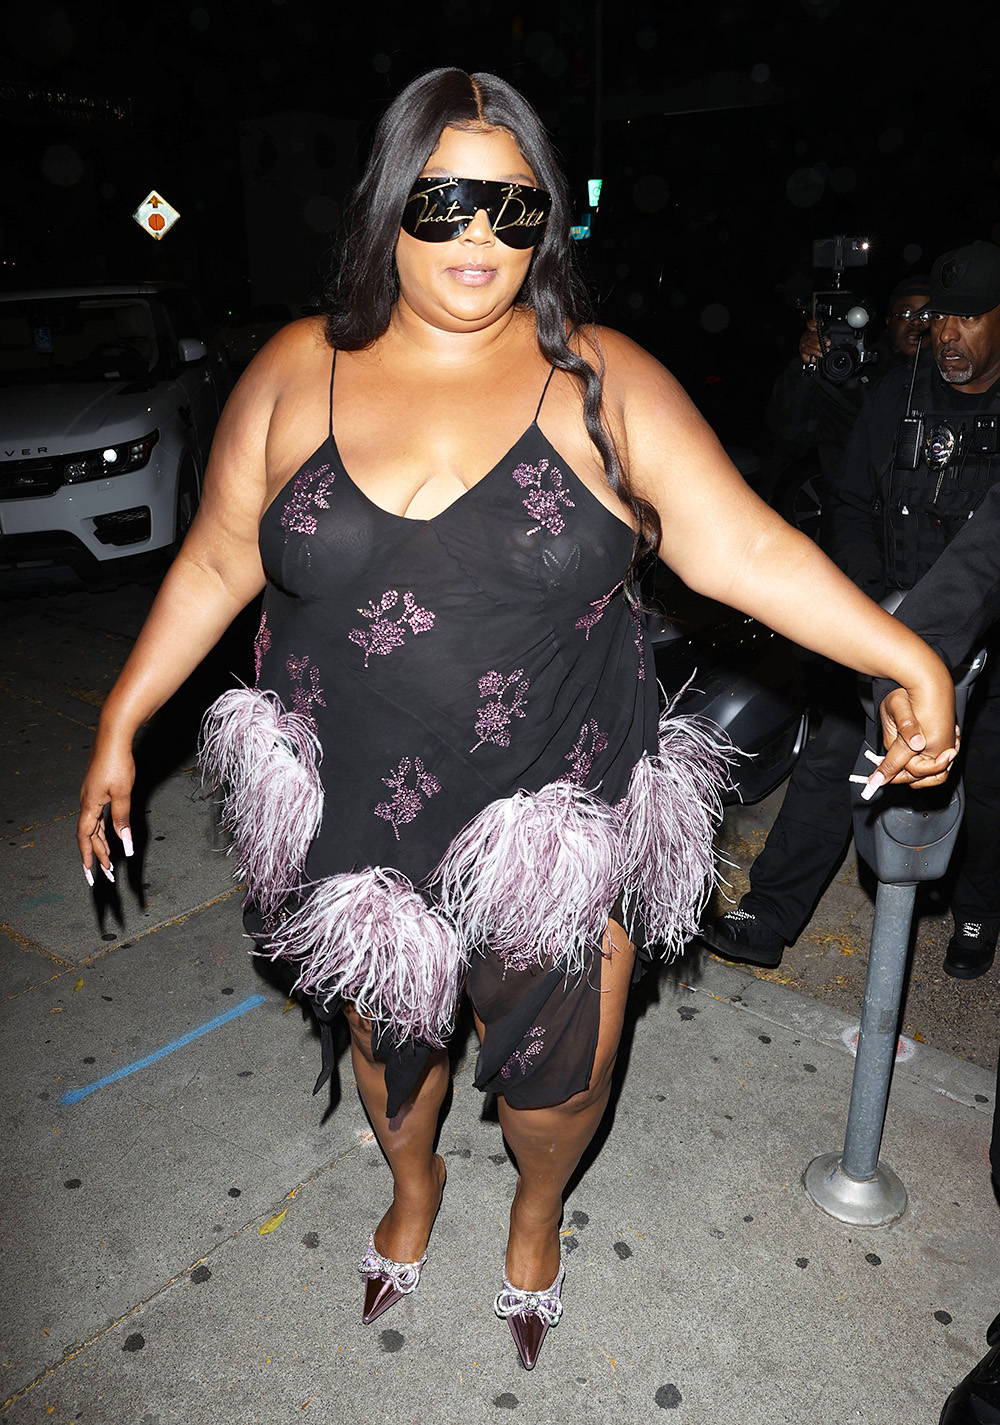 Singer, Lizzo seen arriving to celebrate her 35th birthday on a party bus with friends at Craigs Restaurant in West Hollywood. April 26, 2022 Photo: Lizzo. Photo credit : MEGA TheMegaAgency.com +1 888 505 6342 (Mega Agency TagID: MEGA851693_002.jpg) [Photo via Mega Agency]